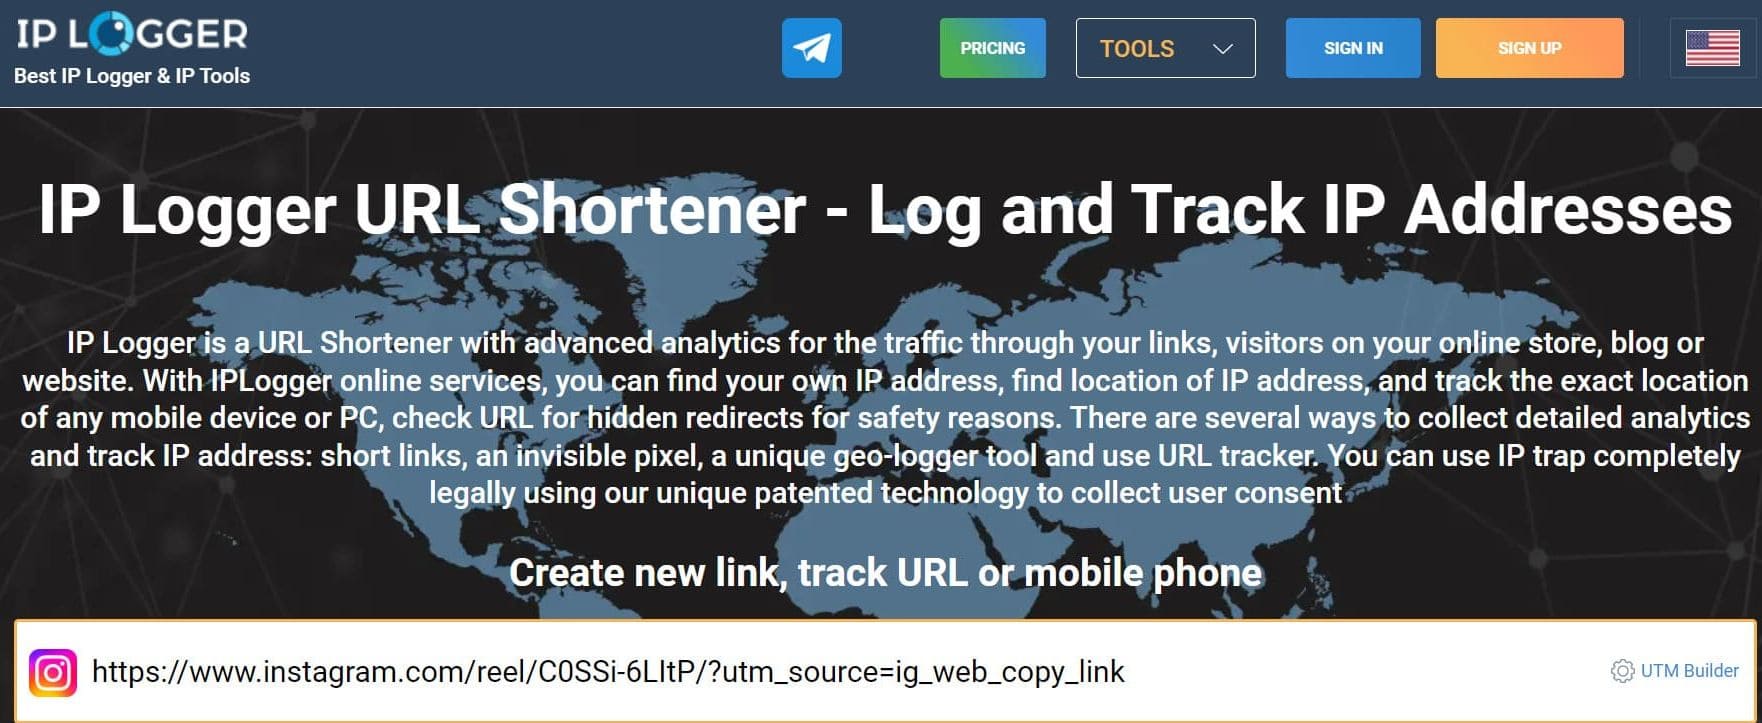 An image of IPLogger with an Instagram reel URL